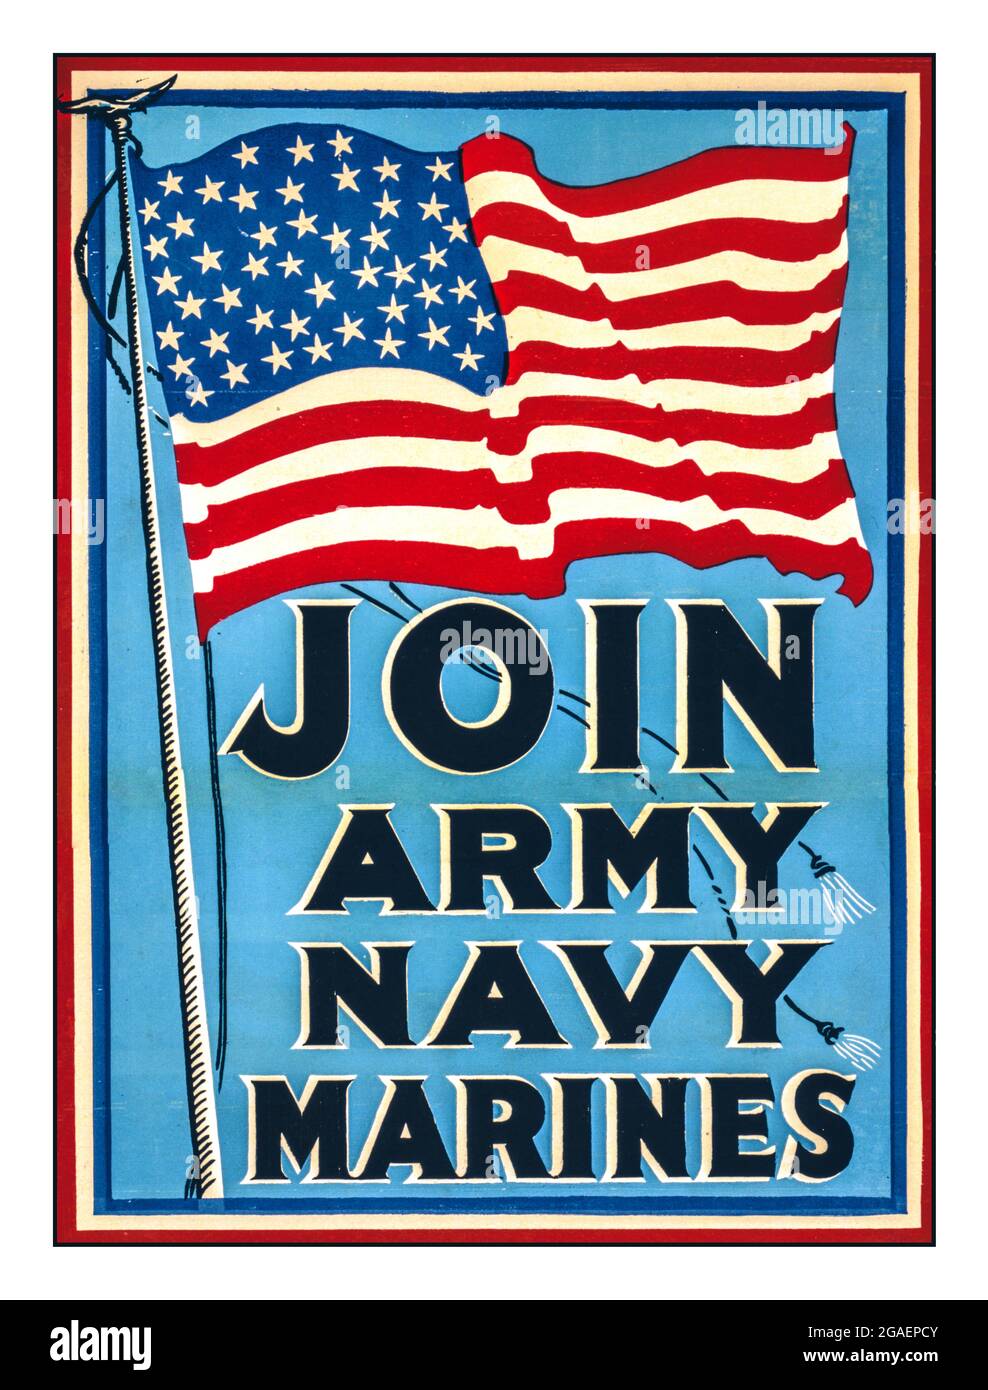 Vintage World War I Recruitment Recruiting Poster for USA America  'Join Army Navy Marines' World War One WW1 Date Created/Published: [1917] (poster) : lithograph, color ;  United States.--Army--Recruiting & enlistment--1910-1920. United States.--Navy--Recruiting & enlistment--1910-1920. United States.--Marine Corps--Recruiting & enlistment--1910-1920. World War, 1914-1918--Recruiting & enlistment--United States. Flags--American--1910-1920. Stock Photo